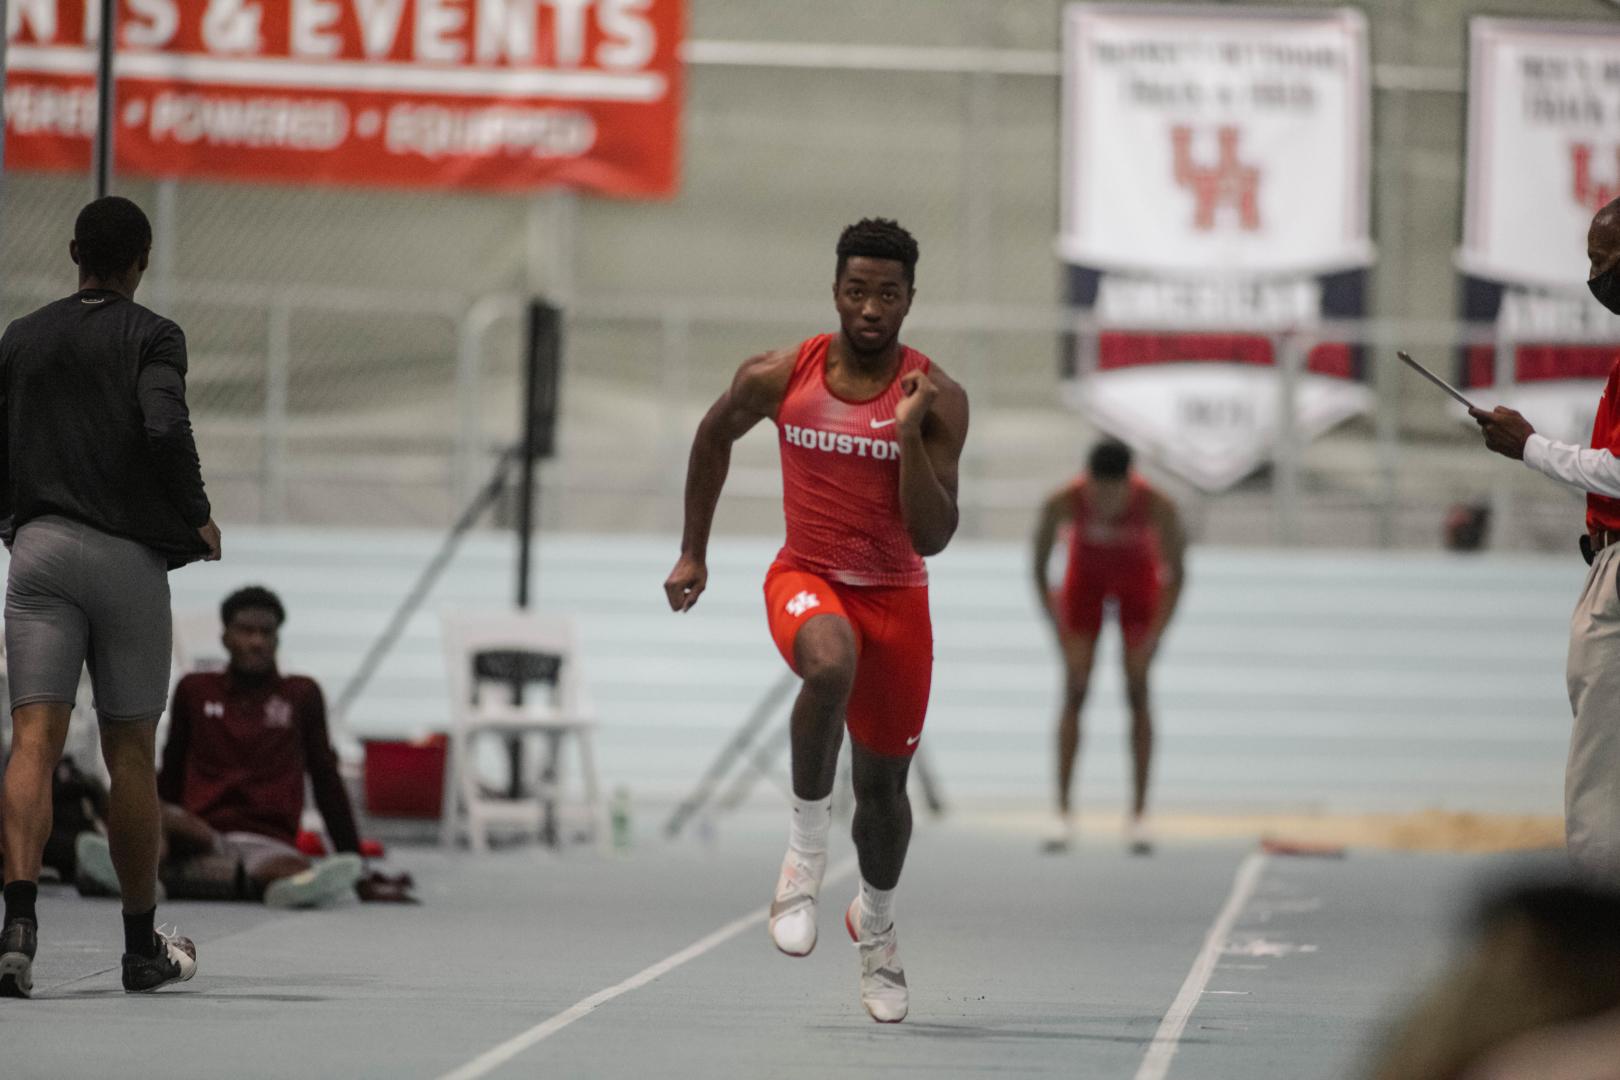 The UH track and field teams collected several podium finishes as the team split for both the Texas Relays in Austin and the Victor Lopez Invitational at Rice University. | James Schillinger/The Cougar